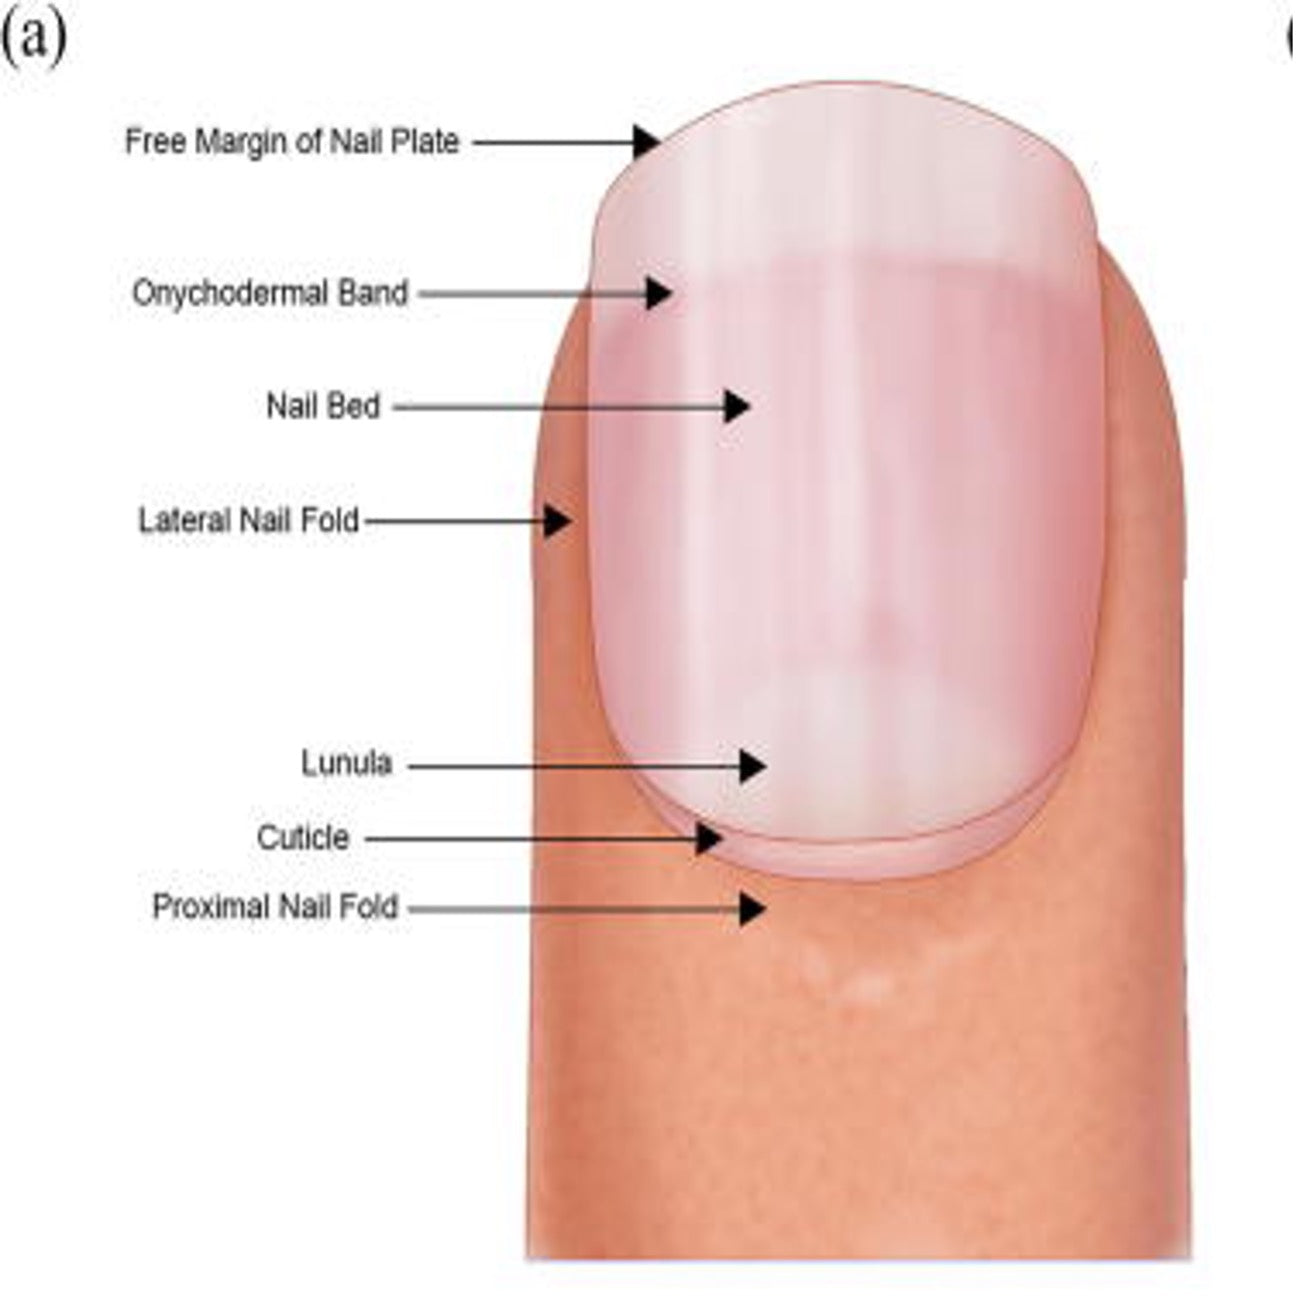 Nail Allergies: Recognise the Signs and Symptoms by Dr. Angela Tewari ...